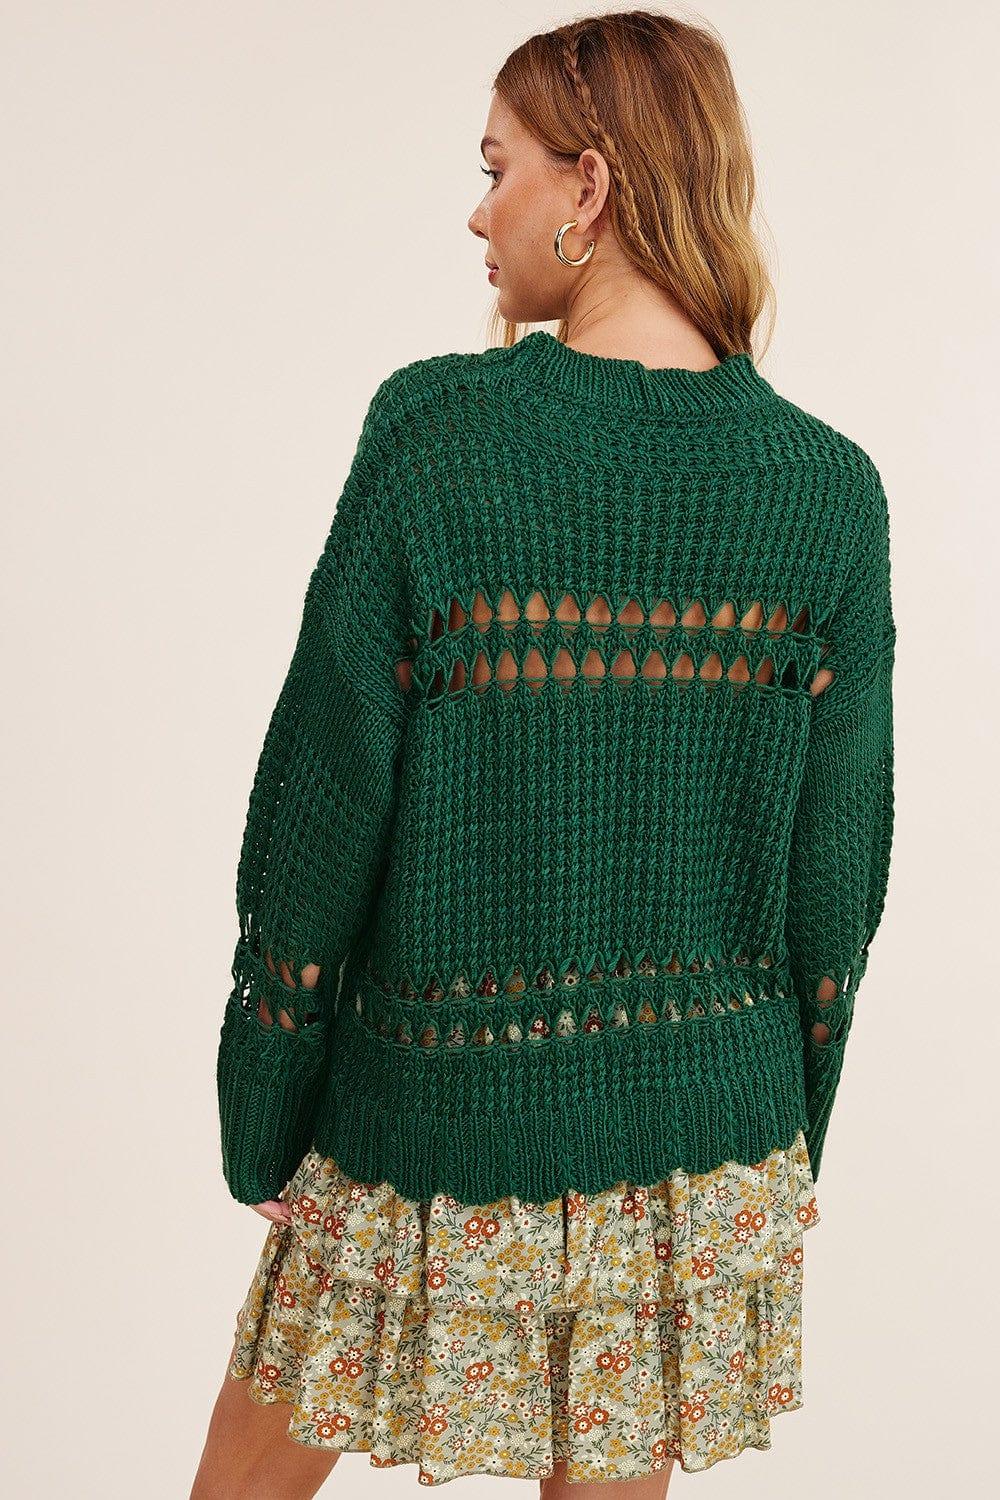 Light weight knit pull over sweater in Green - Esme and Elodie